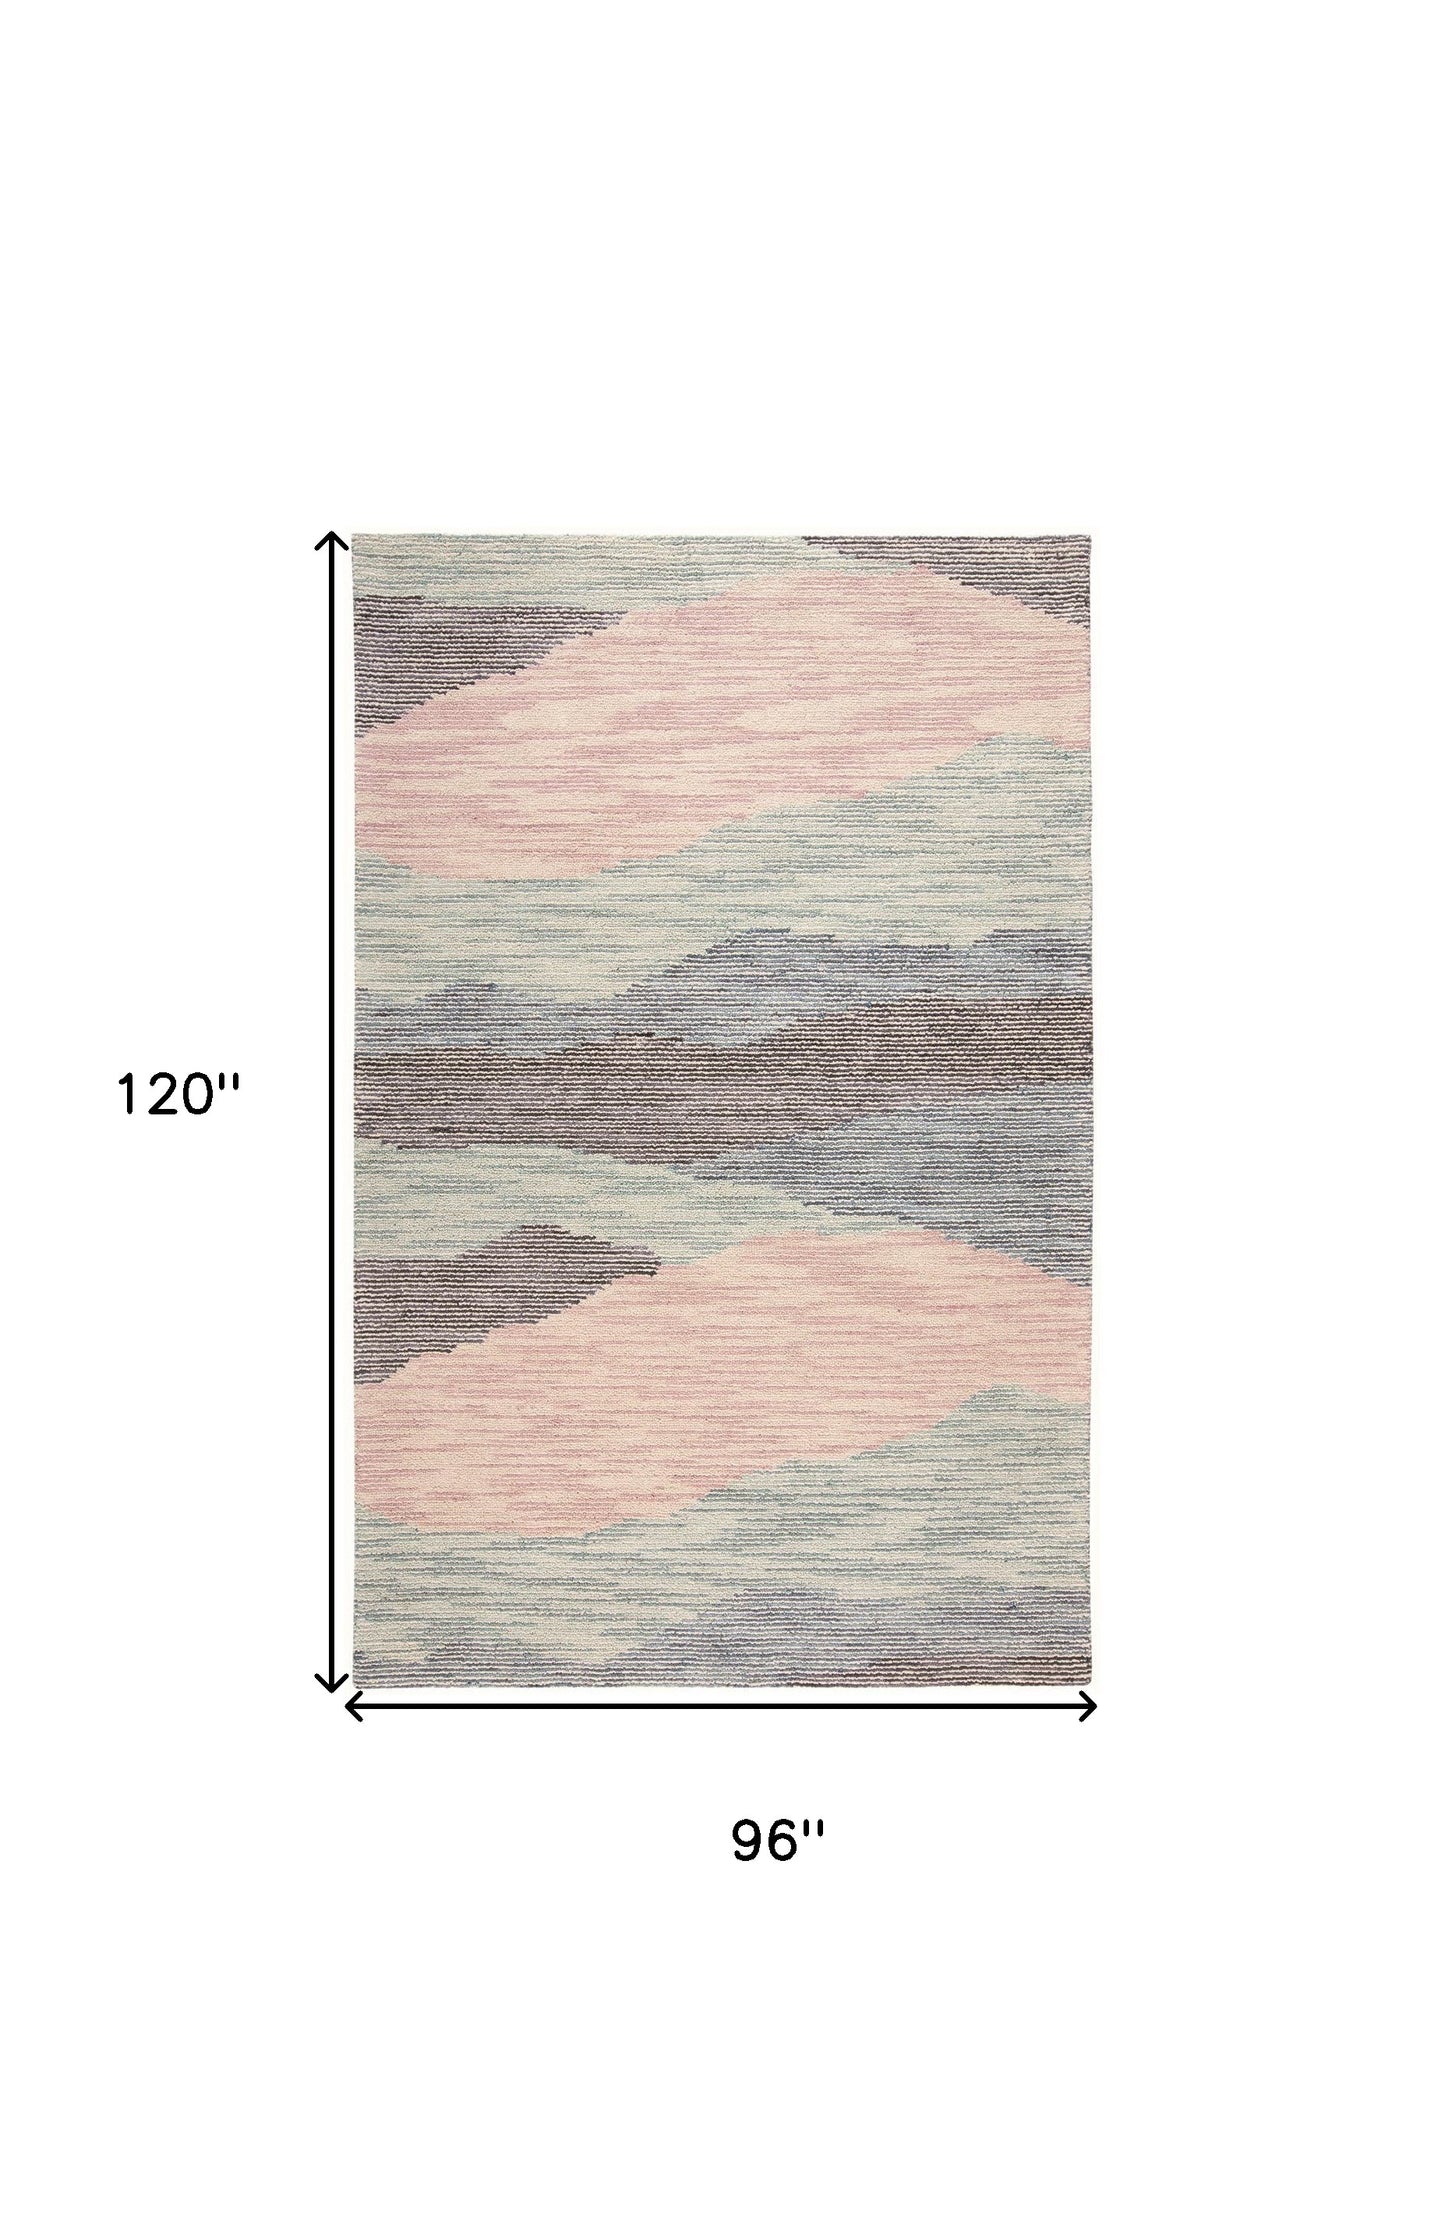 4' X 6' Pink Green And Blue Wool Abstract Tufted Handmade Area Rug